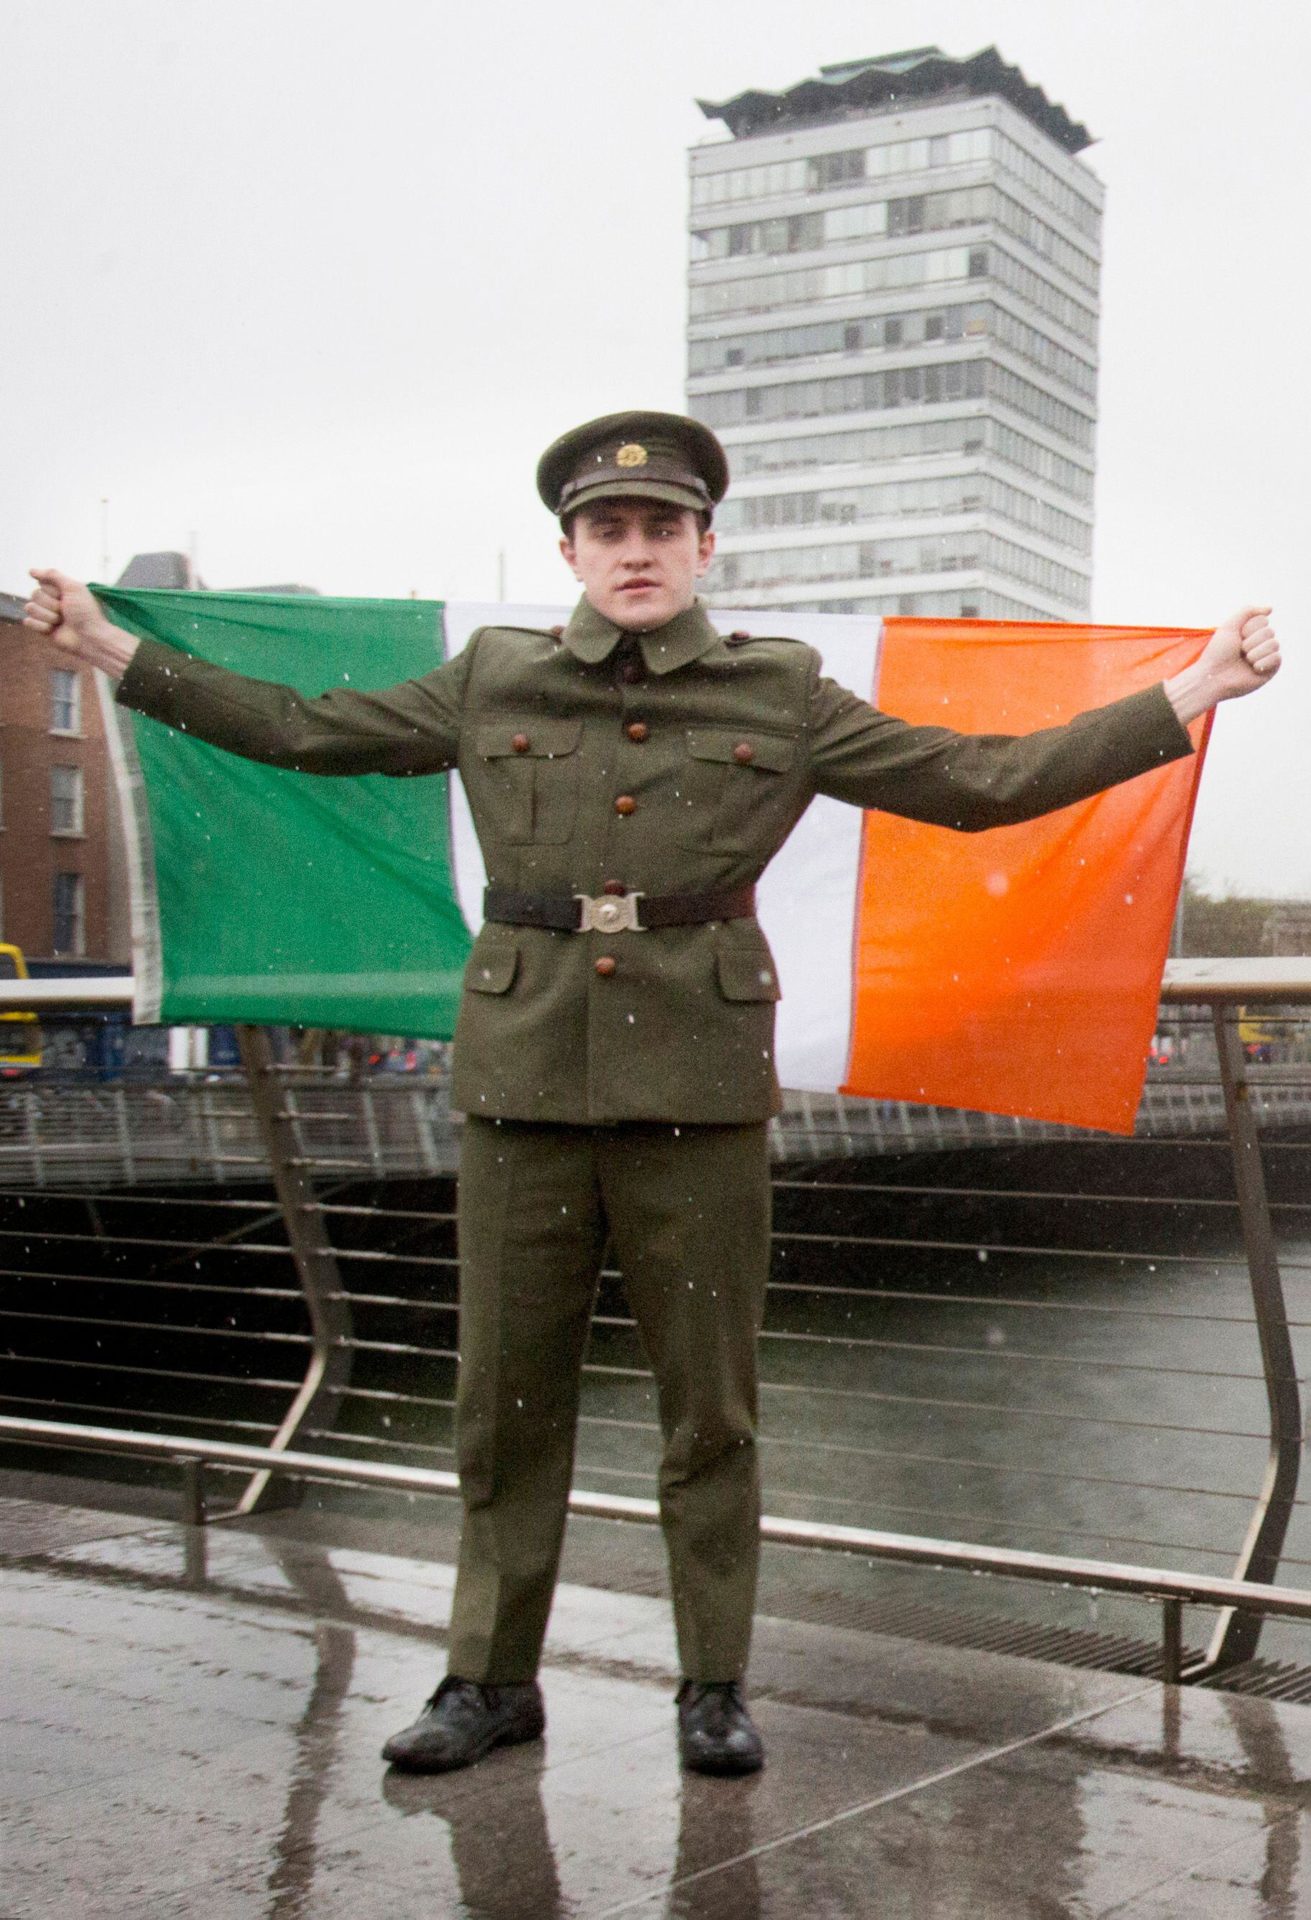 Paul Mescal poses in Dublin city with an Irish Tricolour in April 2018 to publicise The Abbey Theatre and Lyric Hammersmith’s production of The Plough and the Stars by Sean O’Casey.